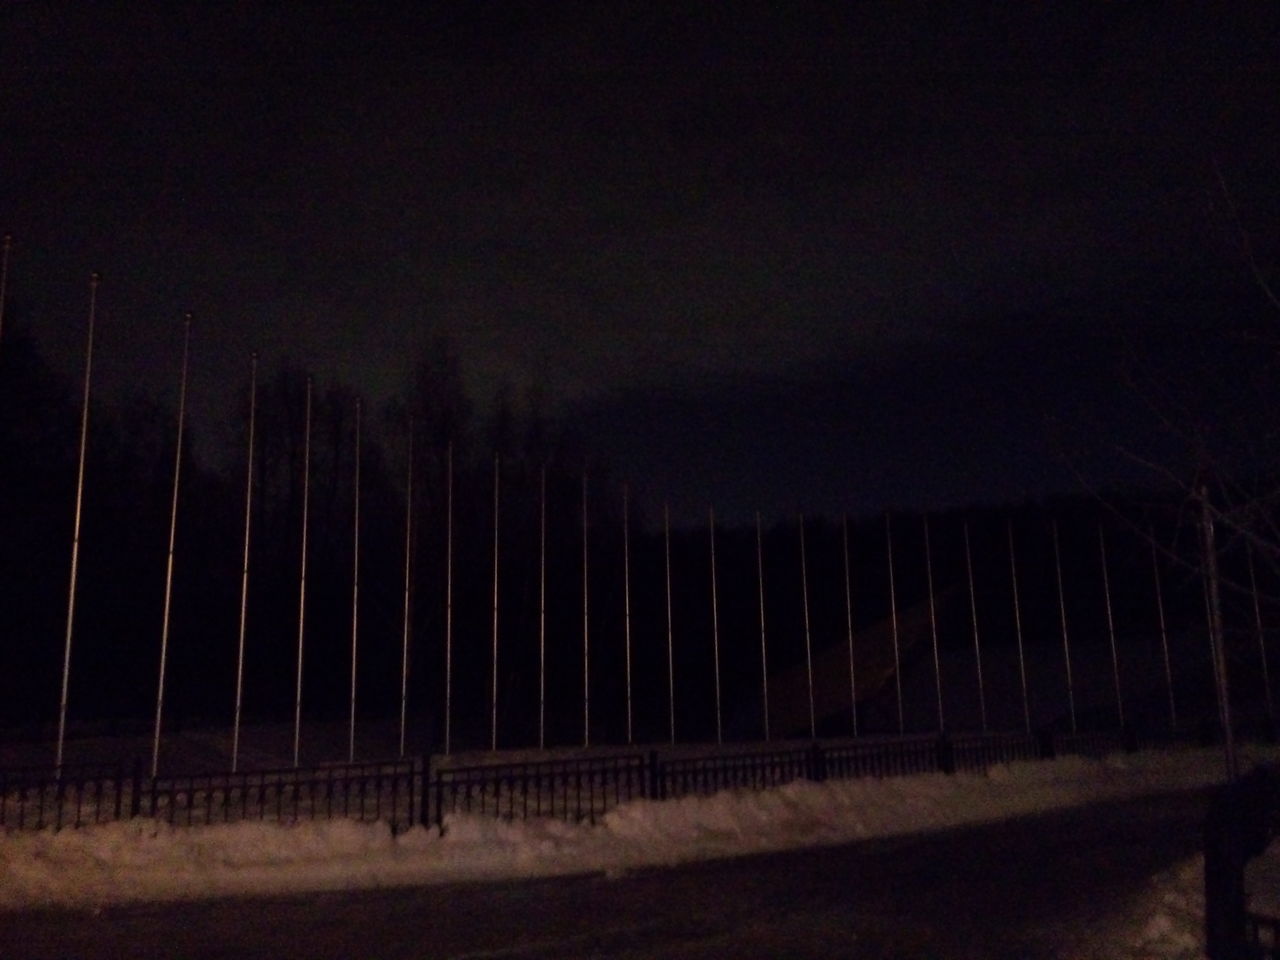 night, sky, fence, road, in a row, illuminated, field, landscape, tranquility, outdoors, dusk, no people, tranquil scene, nature, street, street light, empty, transportation, copy space, grass